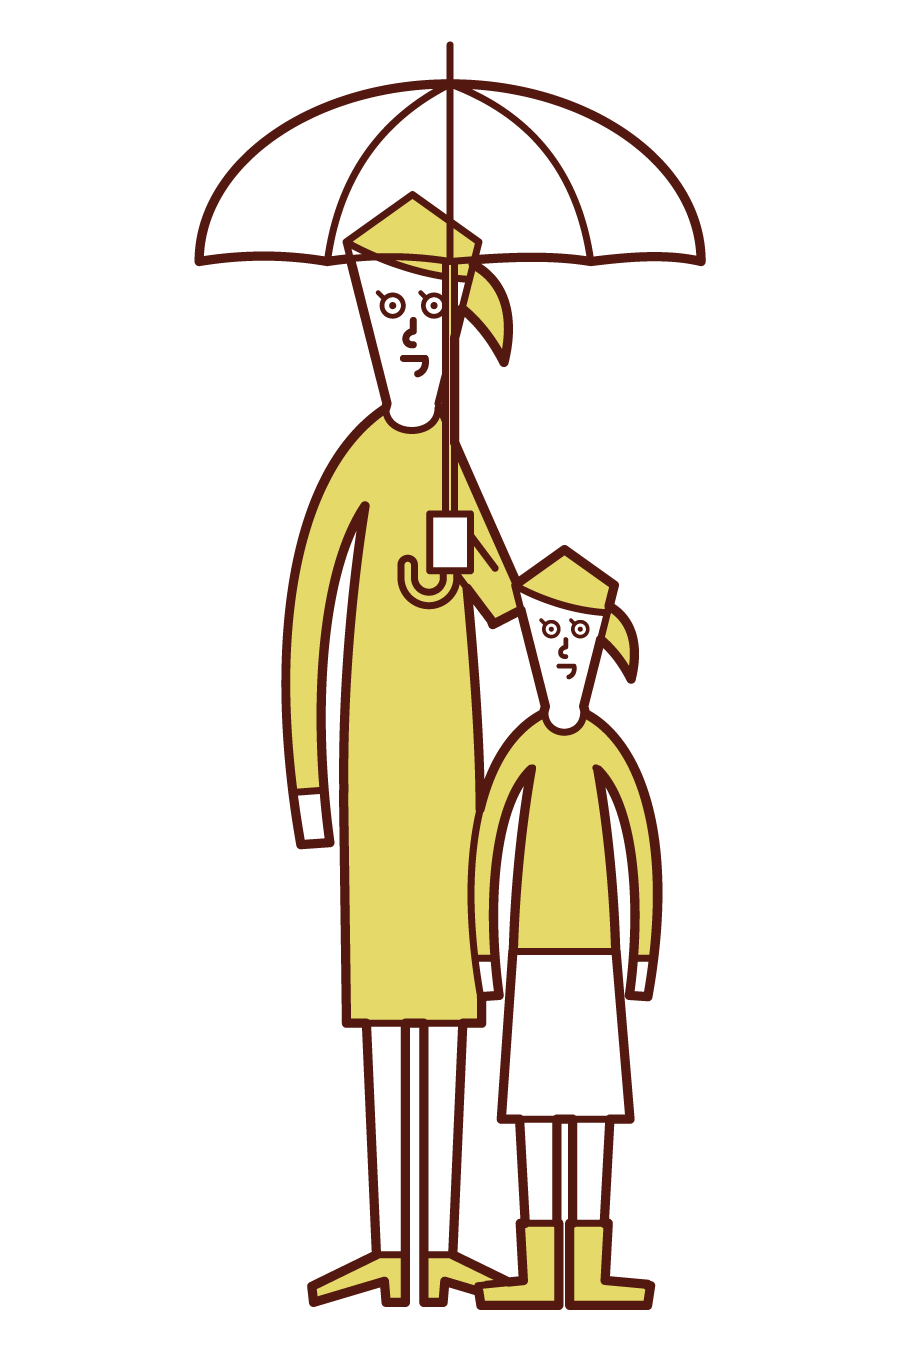 Illustration of a parent and child (woman) holding an umbrella